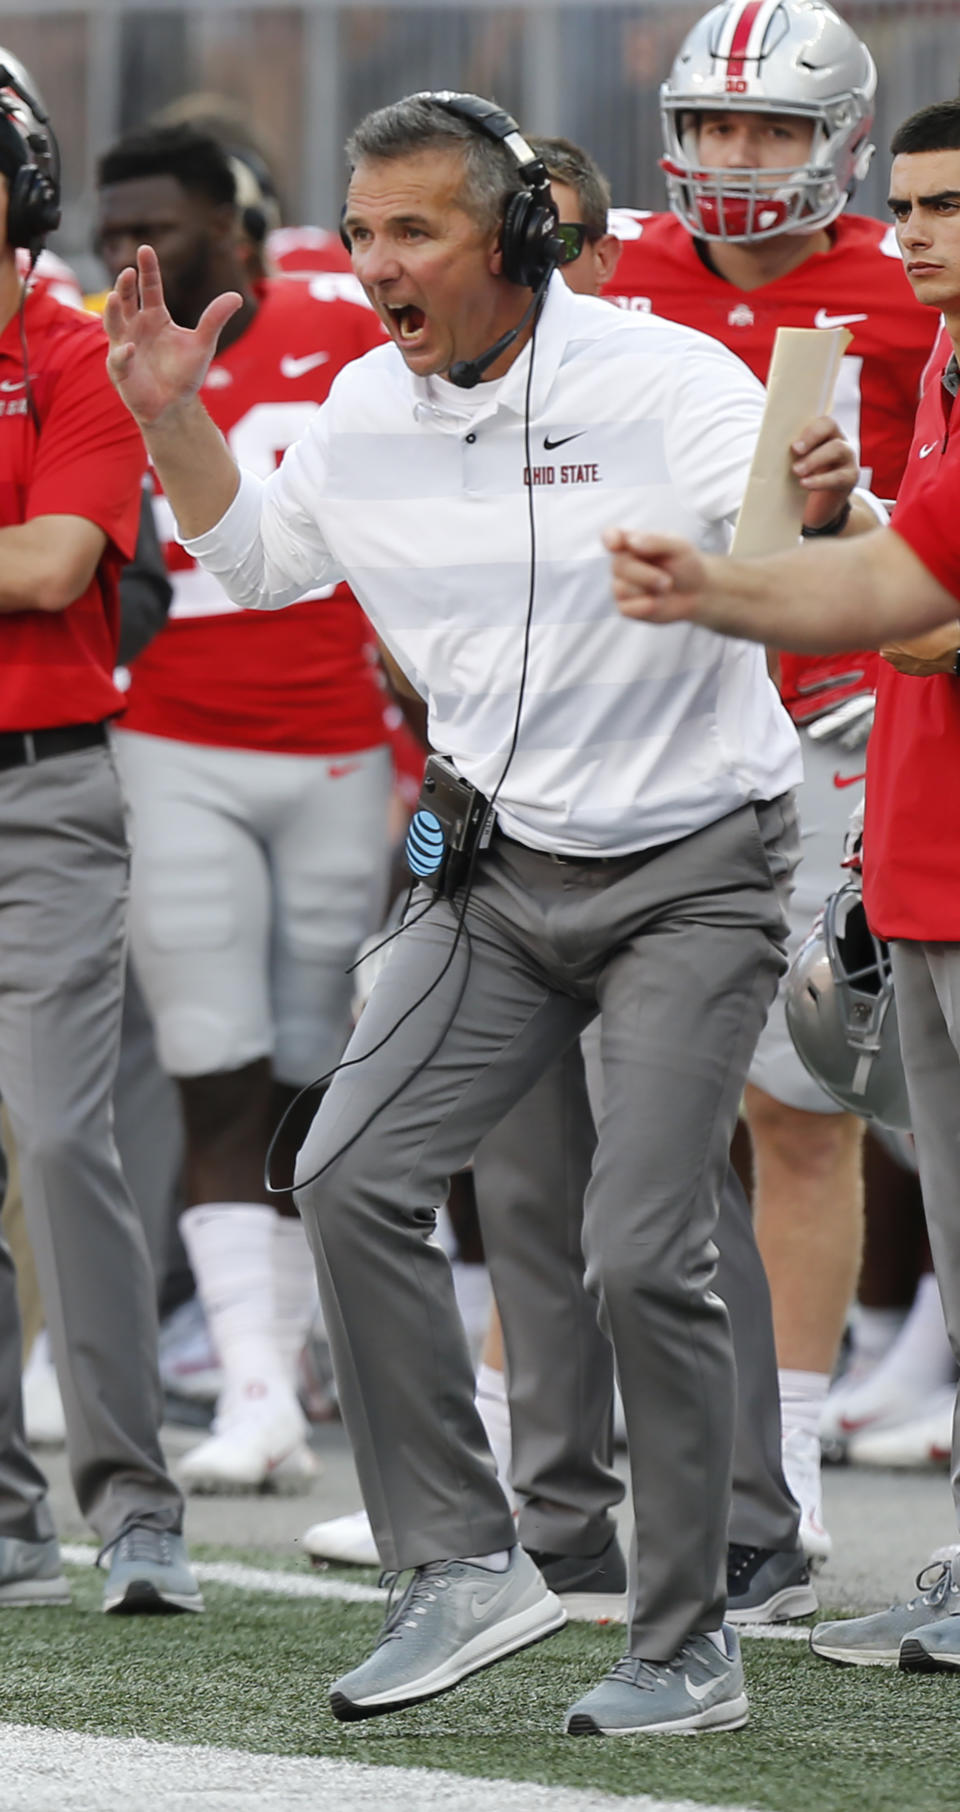 Ohio State head coach Urban Meyer shouts at his team during the first half of an NCAA college football game against Indiana, Saturday, Oct. 6, 2018, in Columbus, Ohio. (AP Photo/Jay LaPrete)